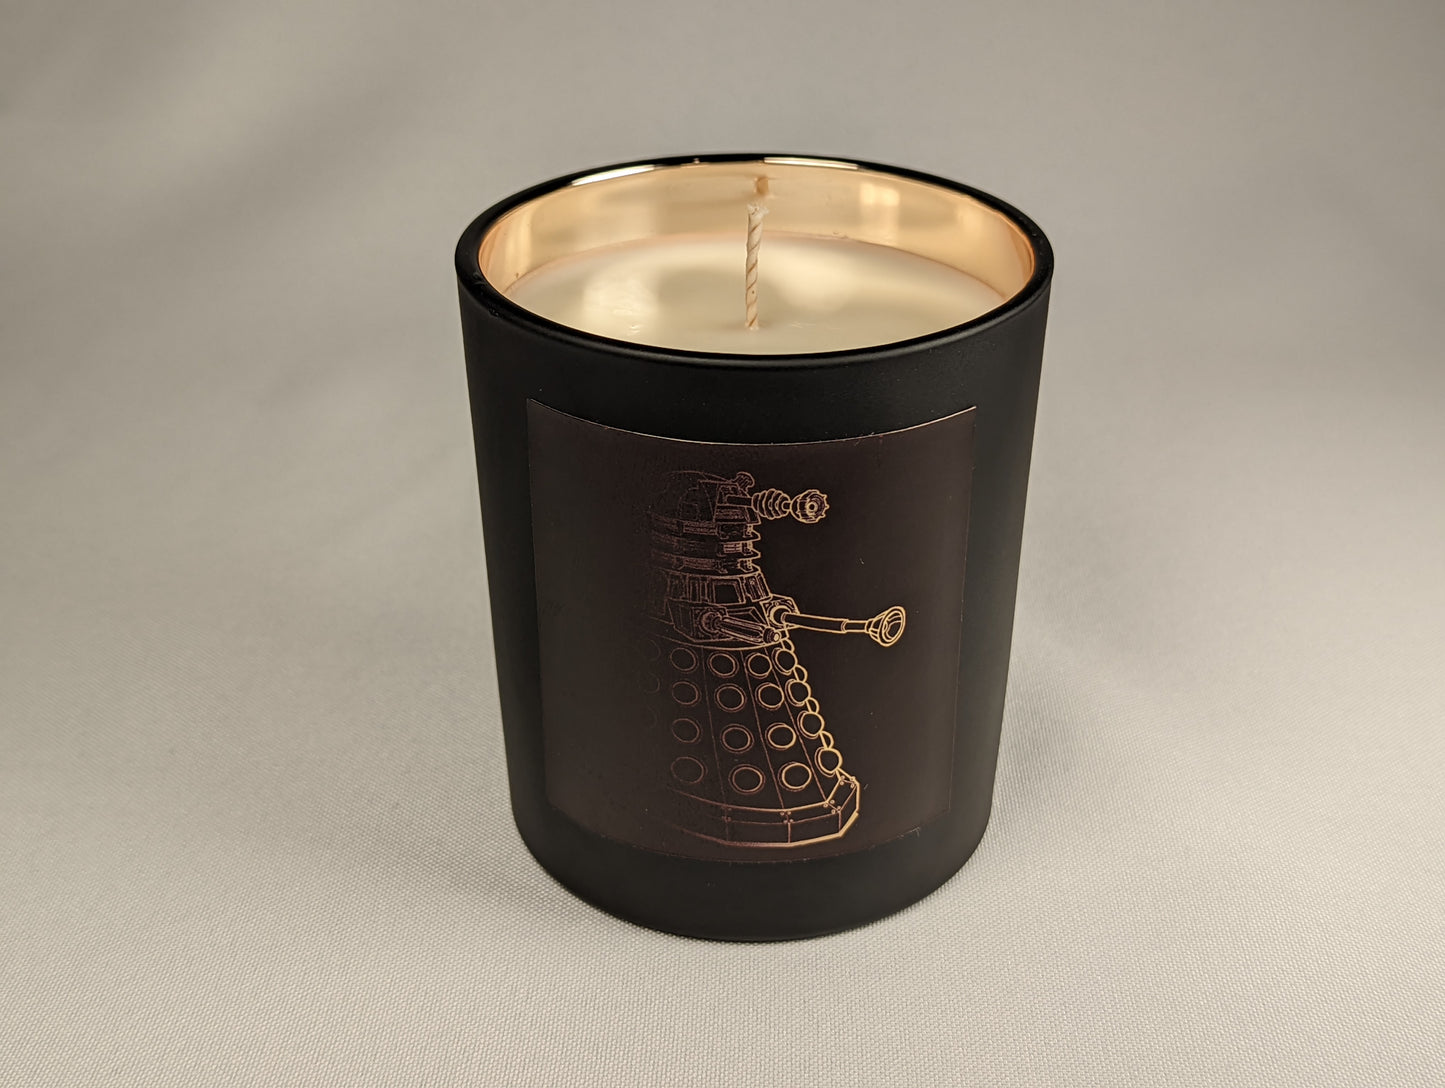 Dalek | Time Lord | Doctor Who Inspired | Luxury Soy Wax Candle